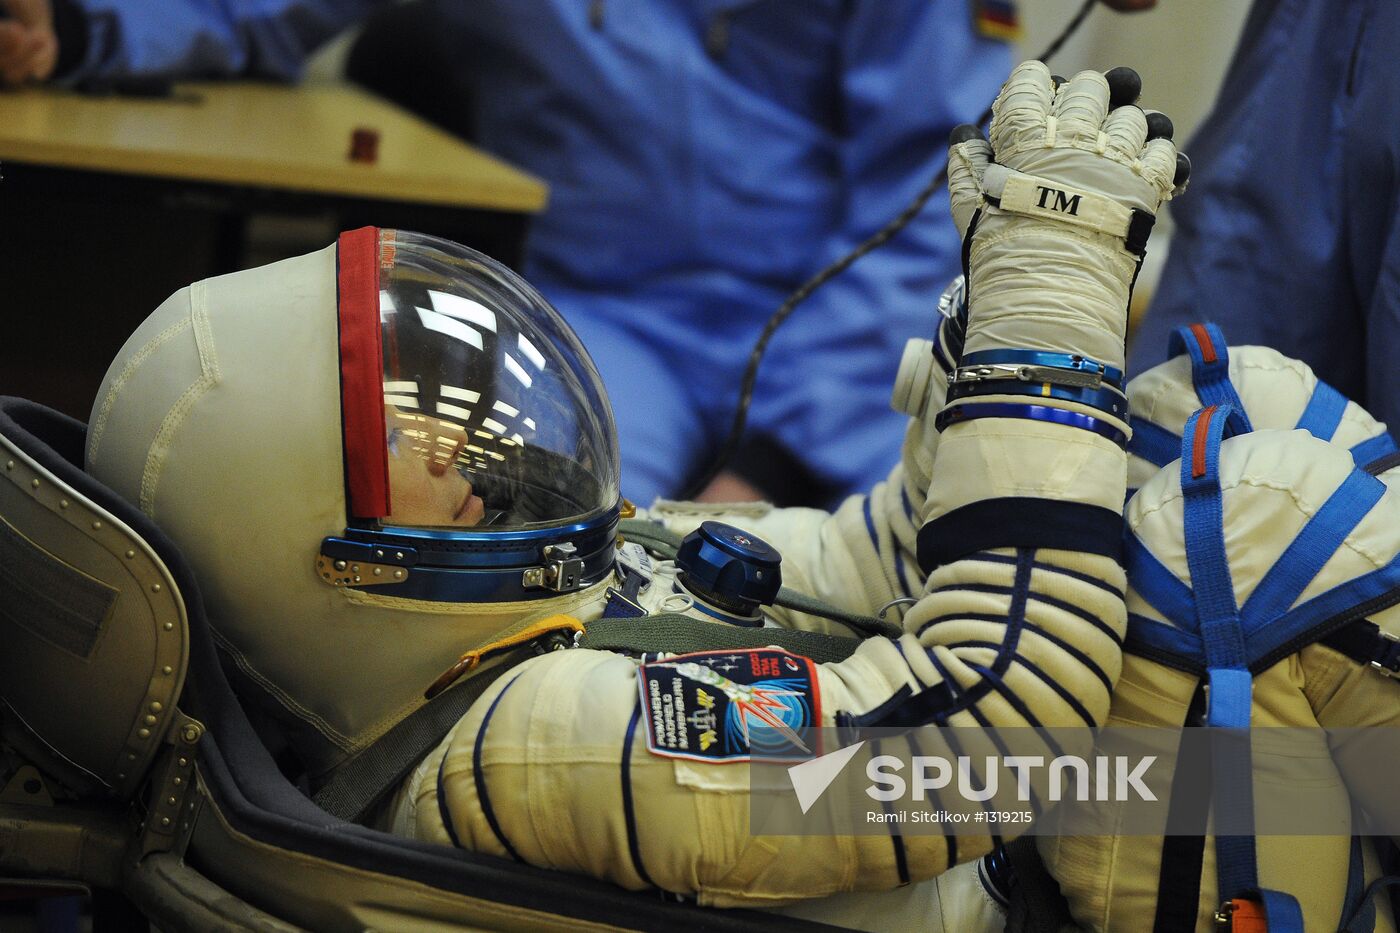 Getting ready to launch Soyuz TMA-07M manned spacecraft